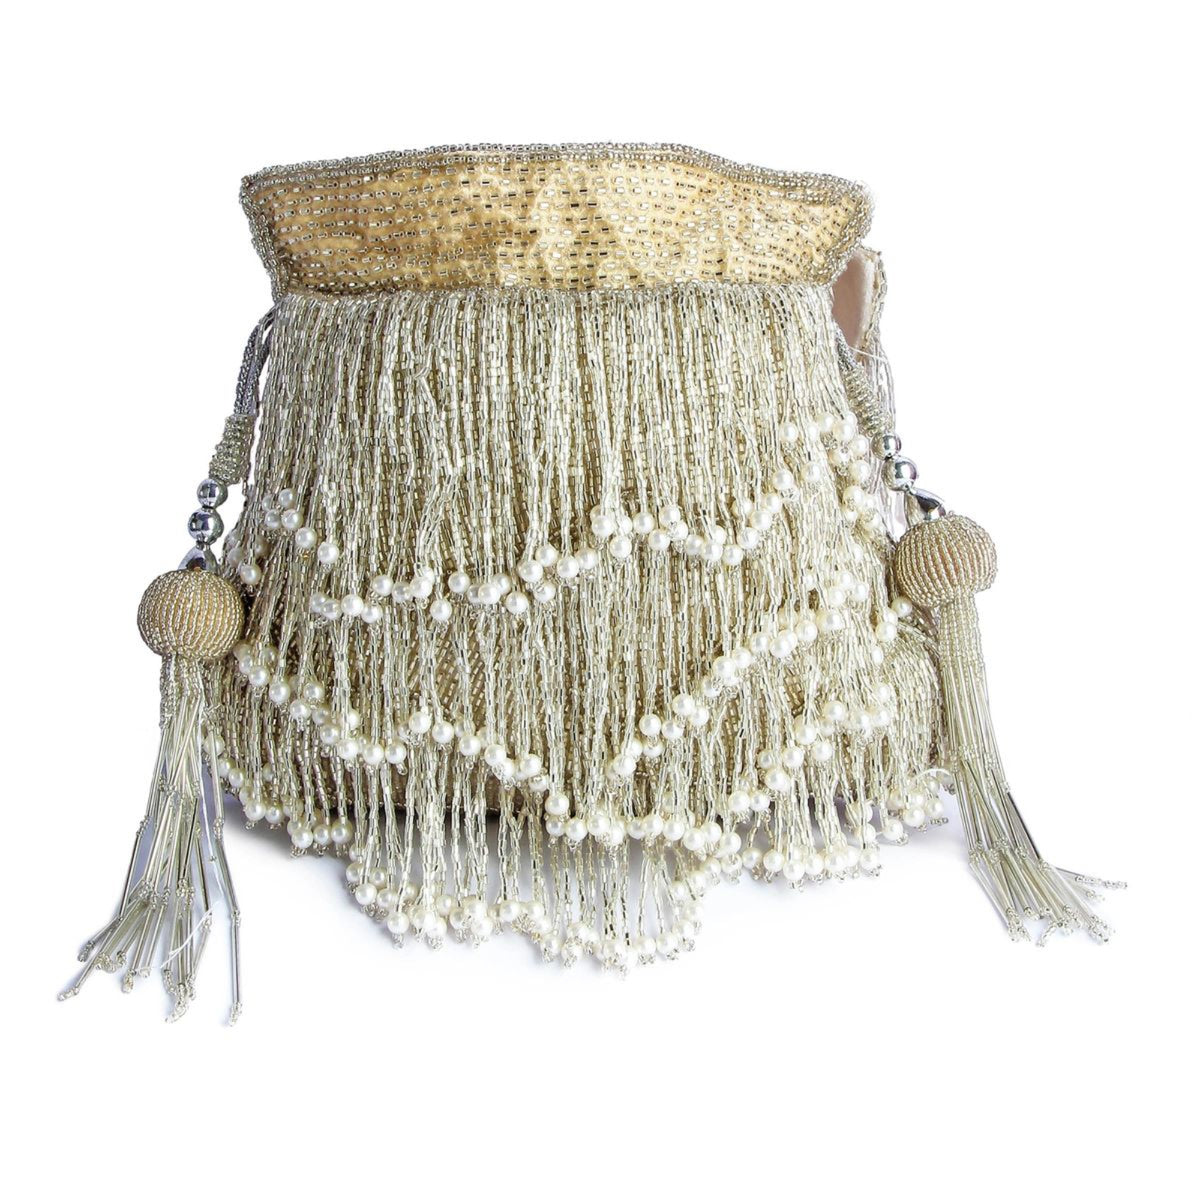 Fringy chic handembroidered potli